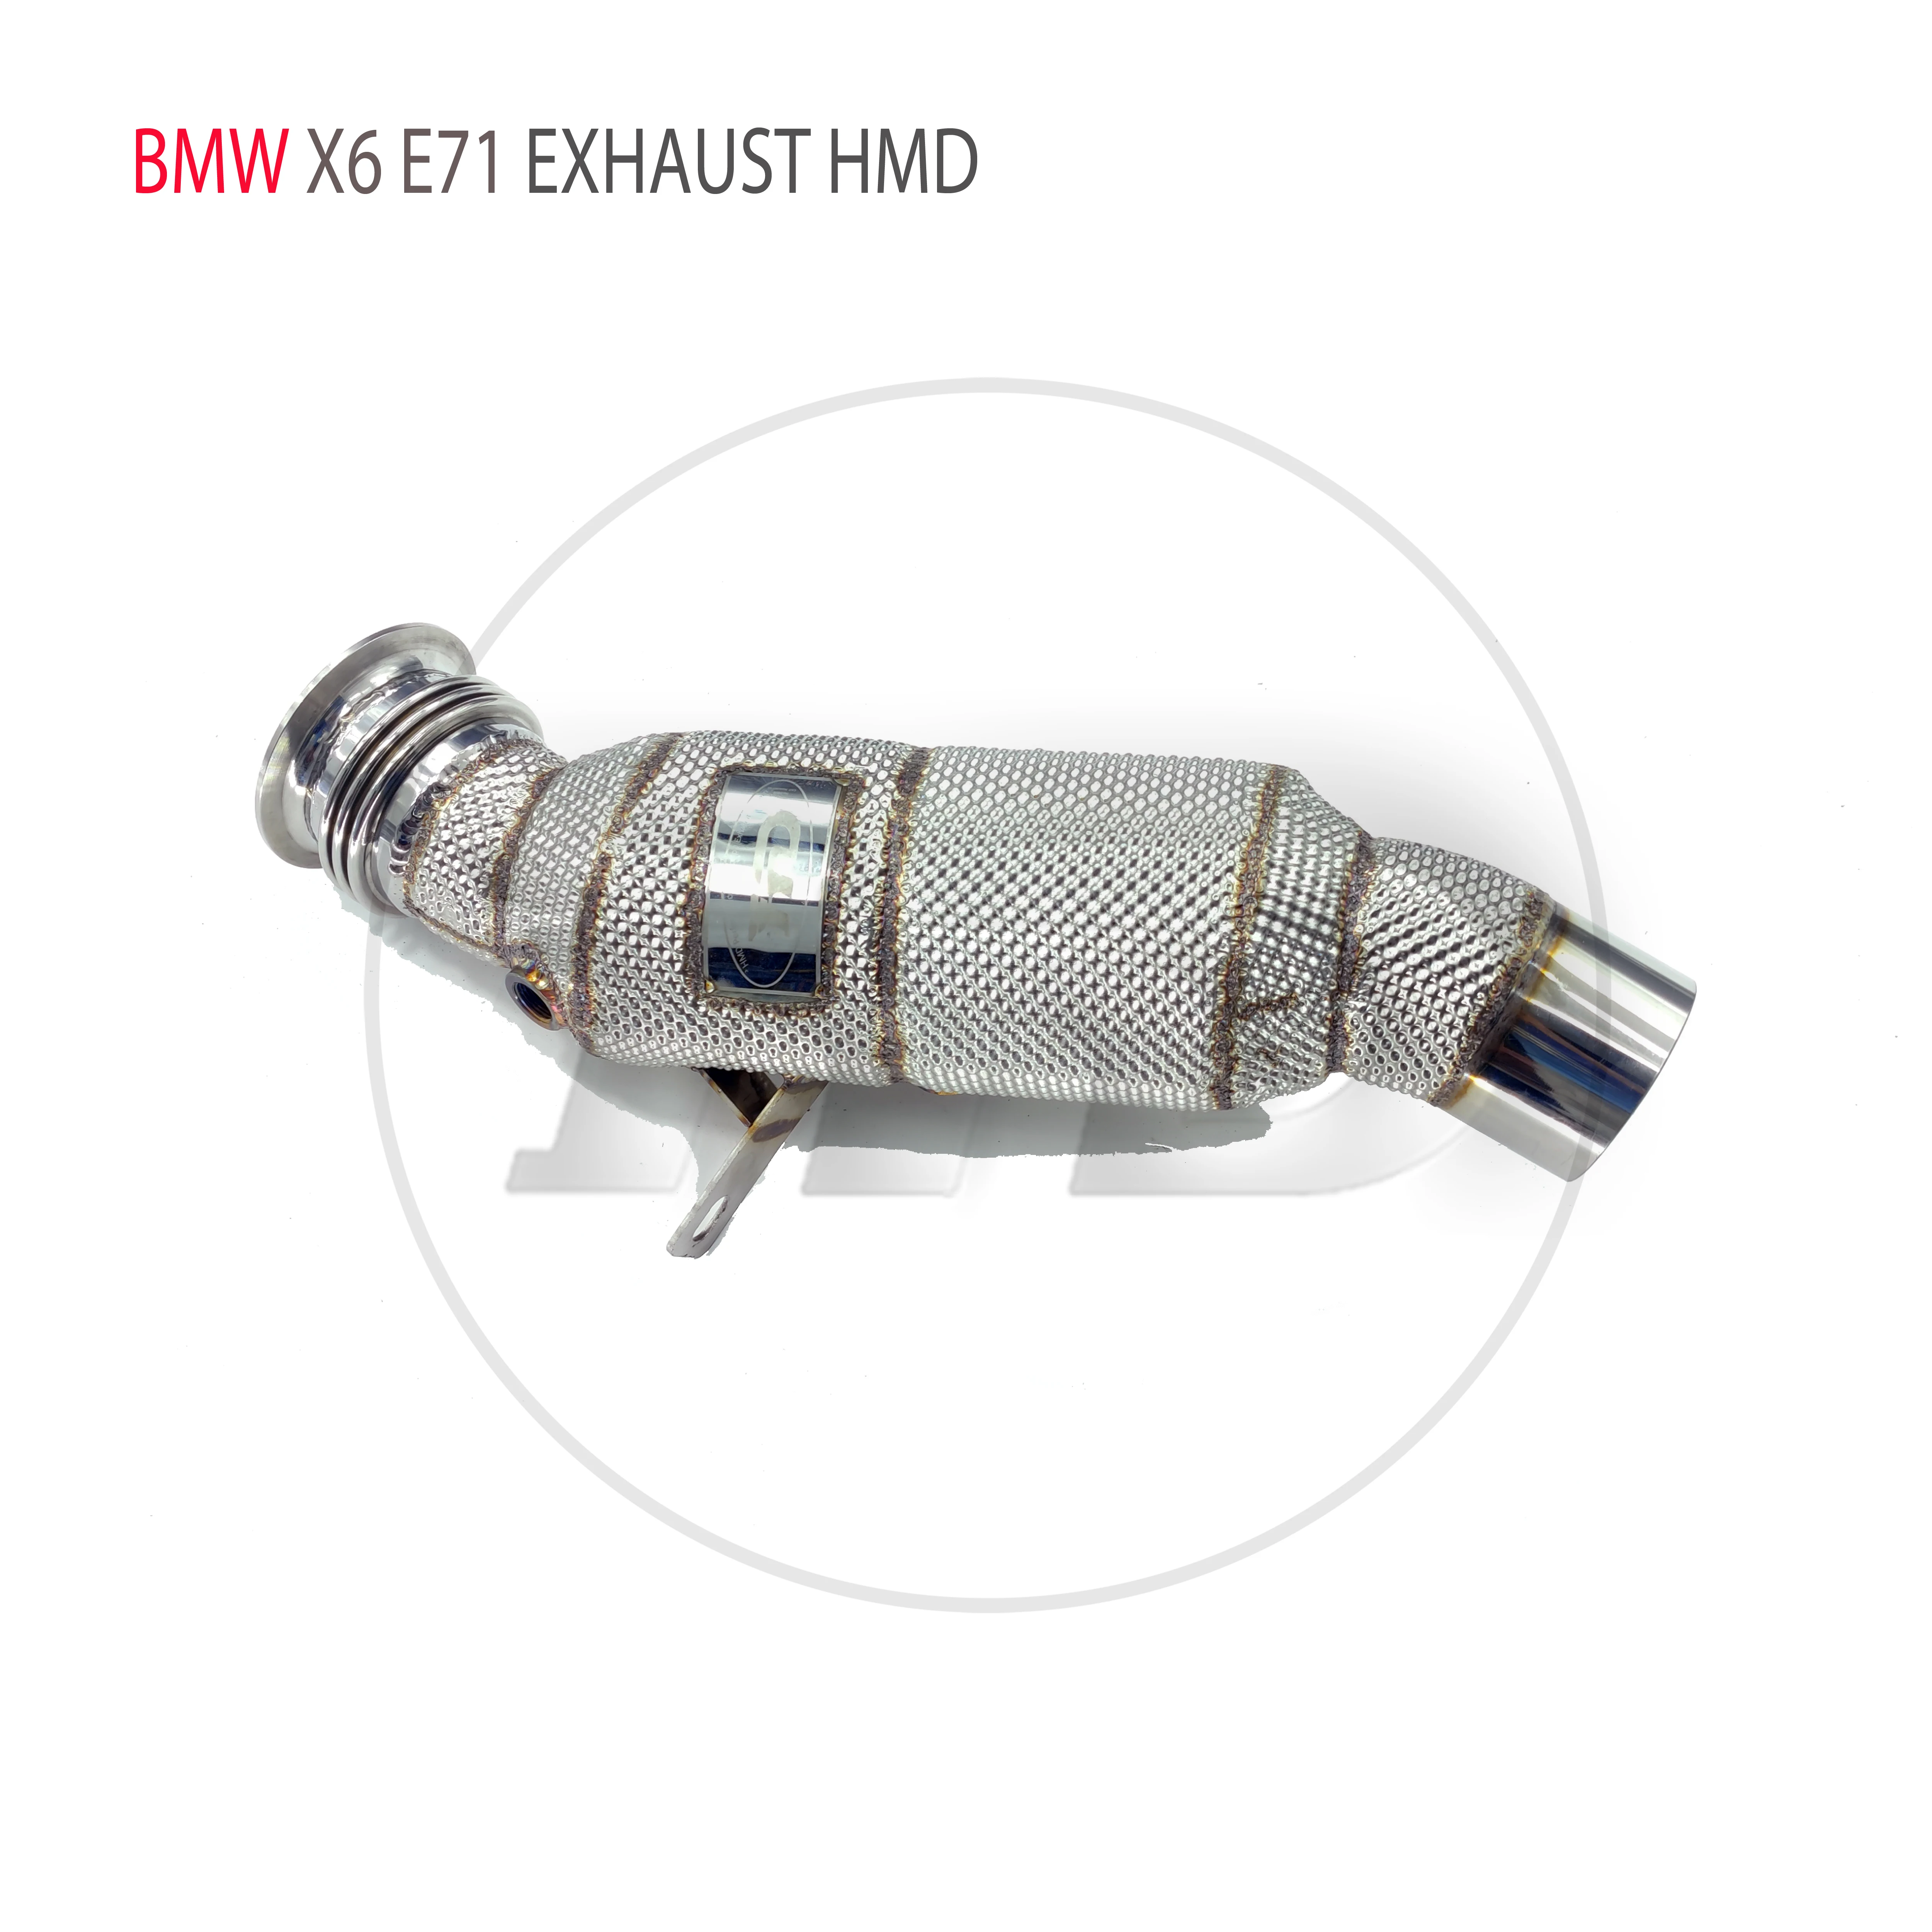 

HMD Exhaust Manifold High Flow Downpipe for BMW X5 E70 X6 E71 2008-2014 Car Accessories With Catalytic Header